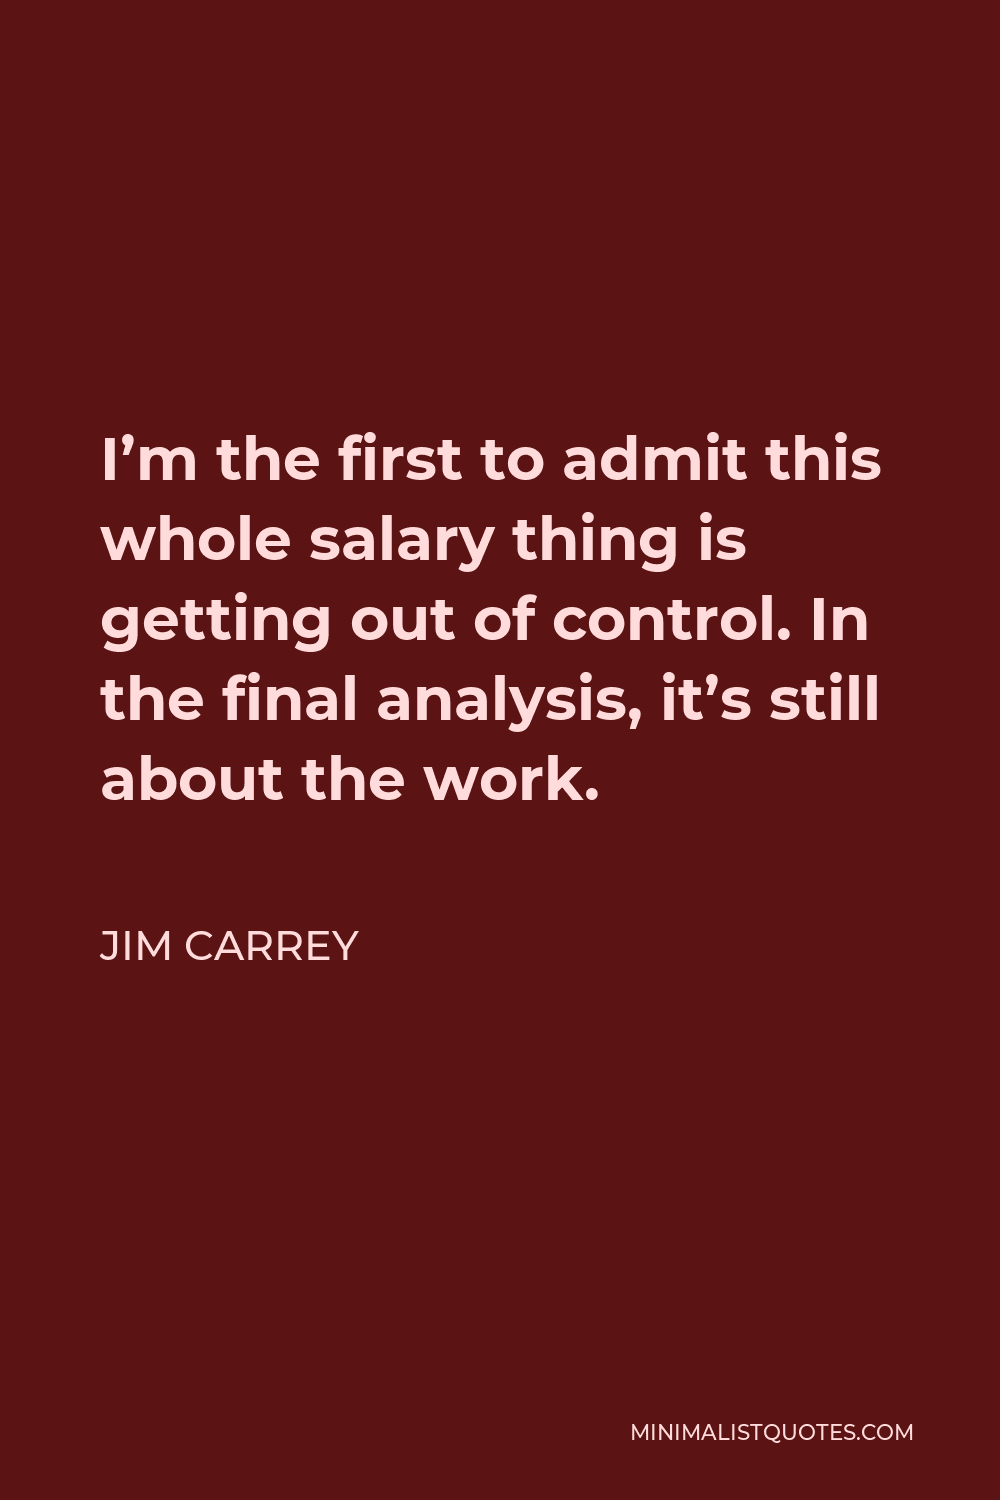 Jim Carrey Quote - I’m the first to admit this whole salary thing is getting out of control. In the final analysis, it’s still about the work.